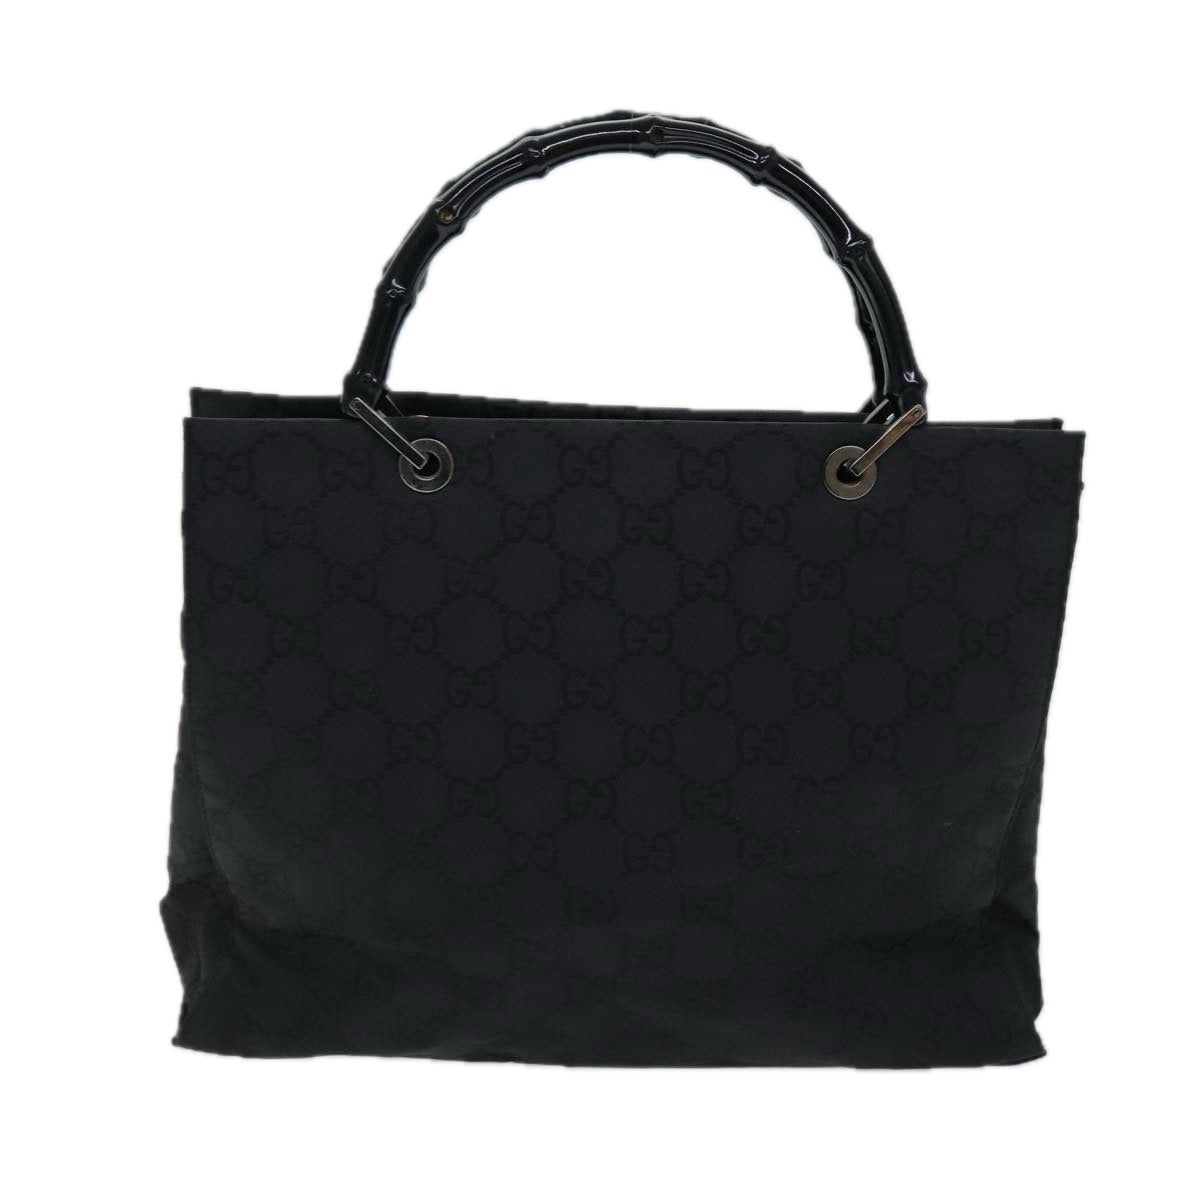 GUCCI Bamboo GG Canvas Hand Bag Black 002 1010 3754 Auth ep4256 - 0